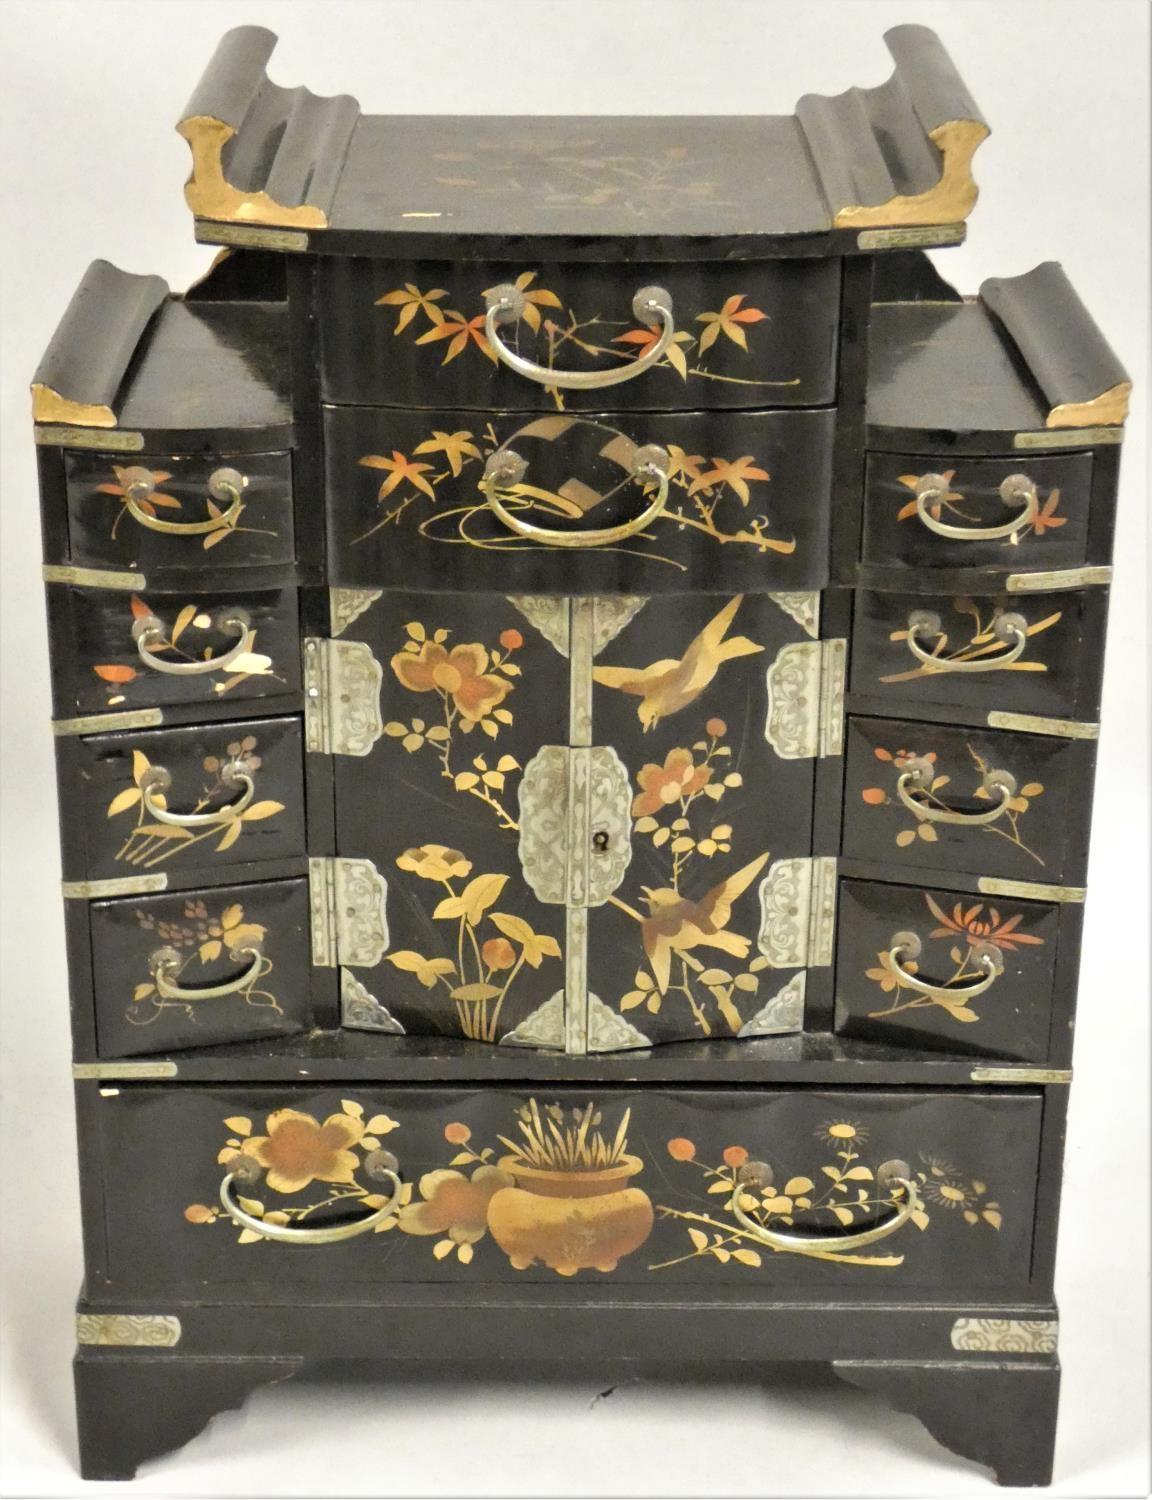 A Japanese jewellery cabinet, of vernacular form, with lacquer bird and foliage decoration, the